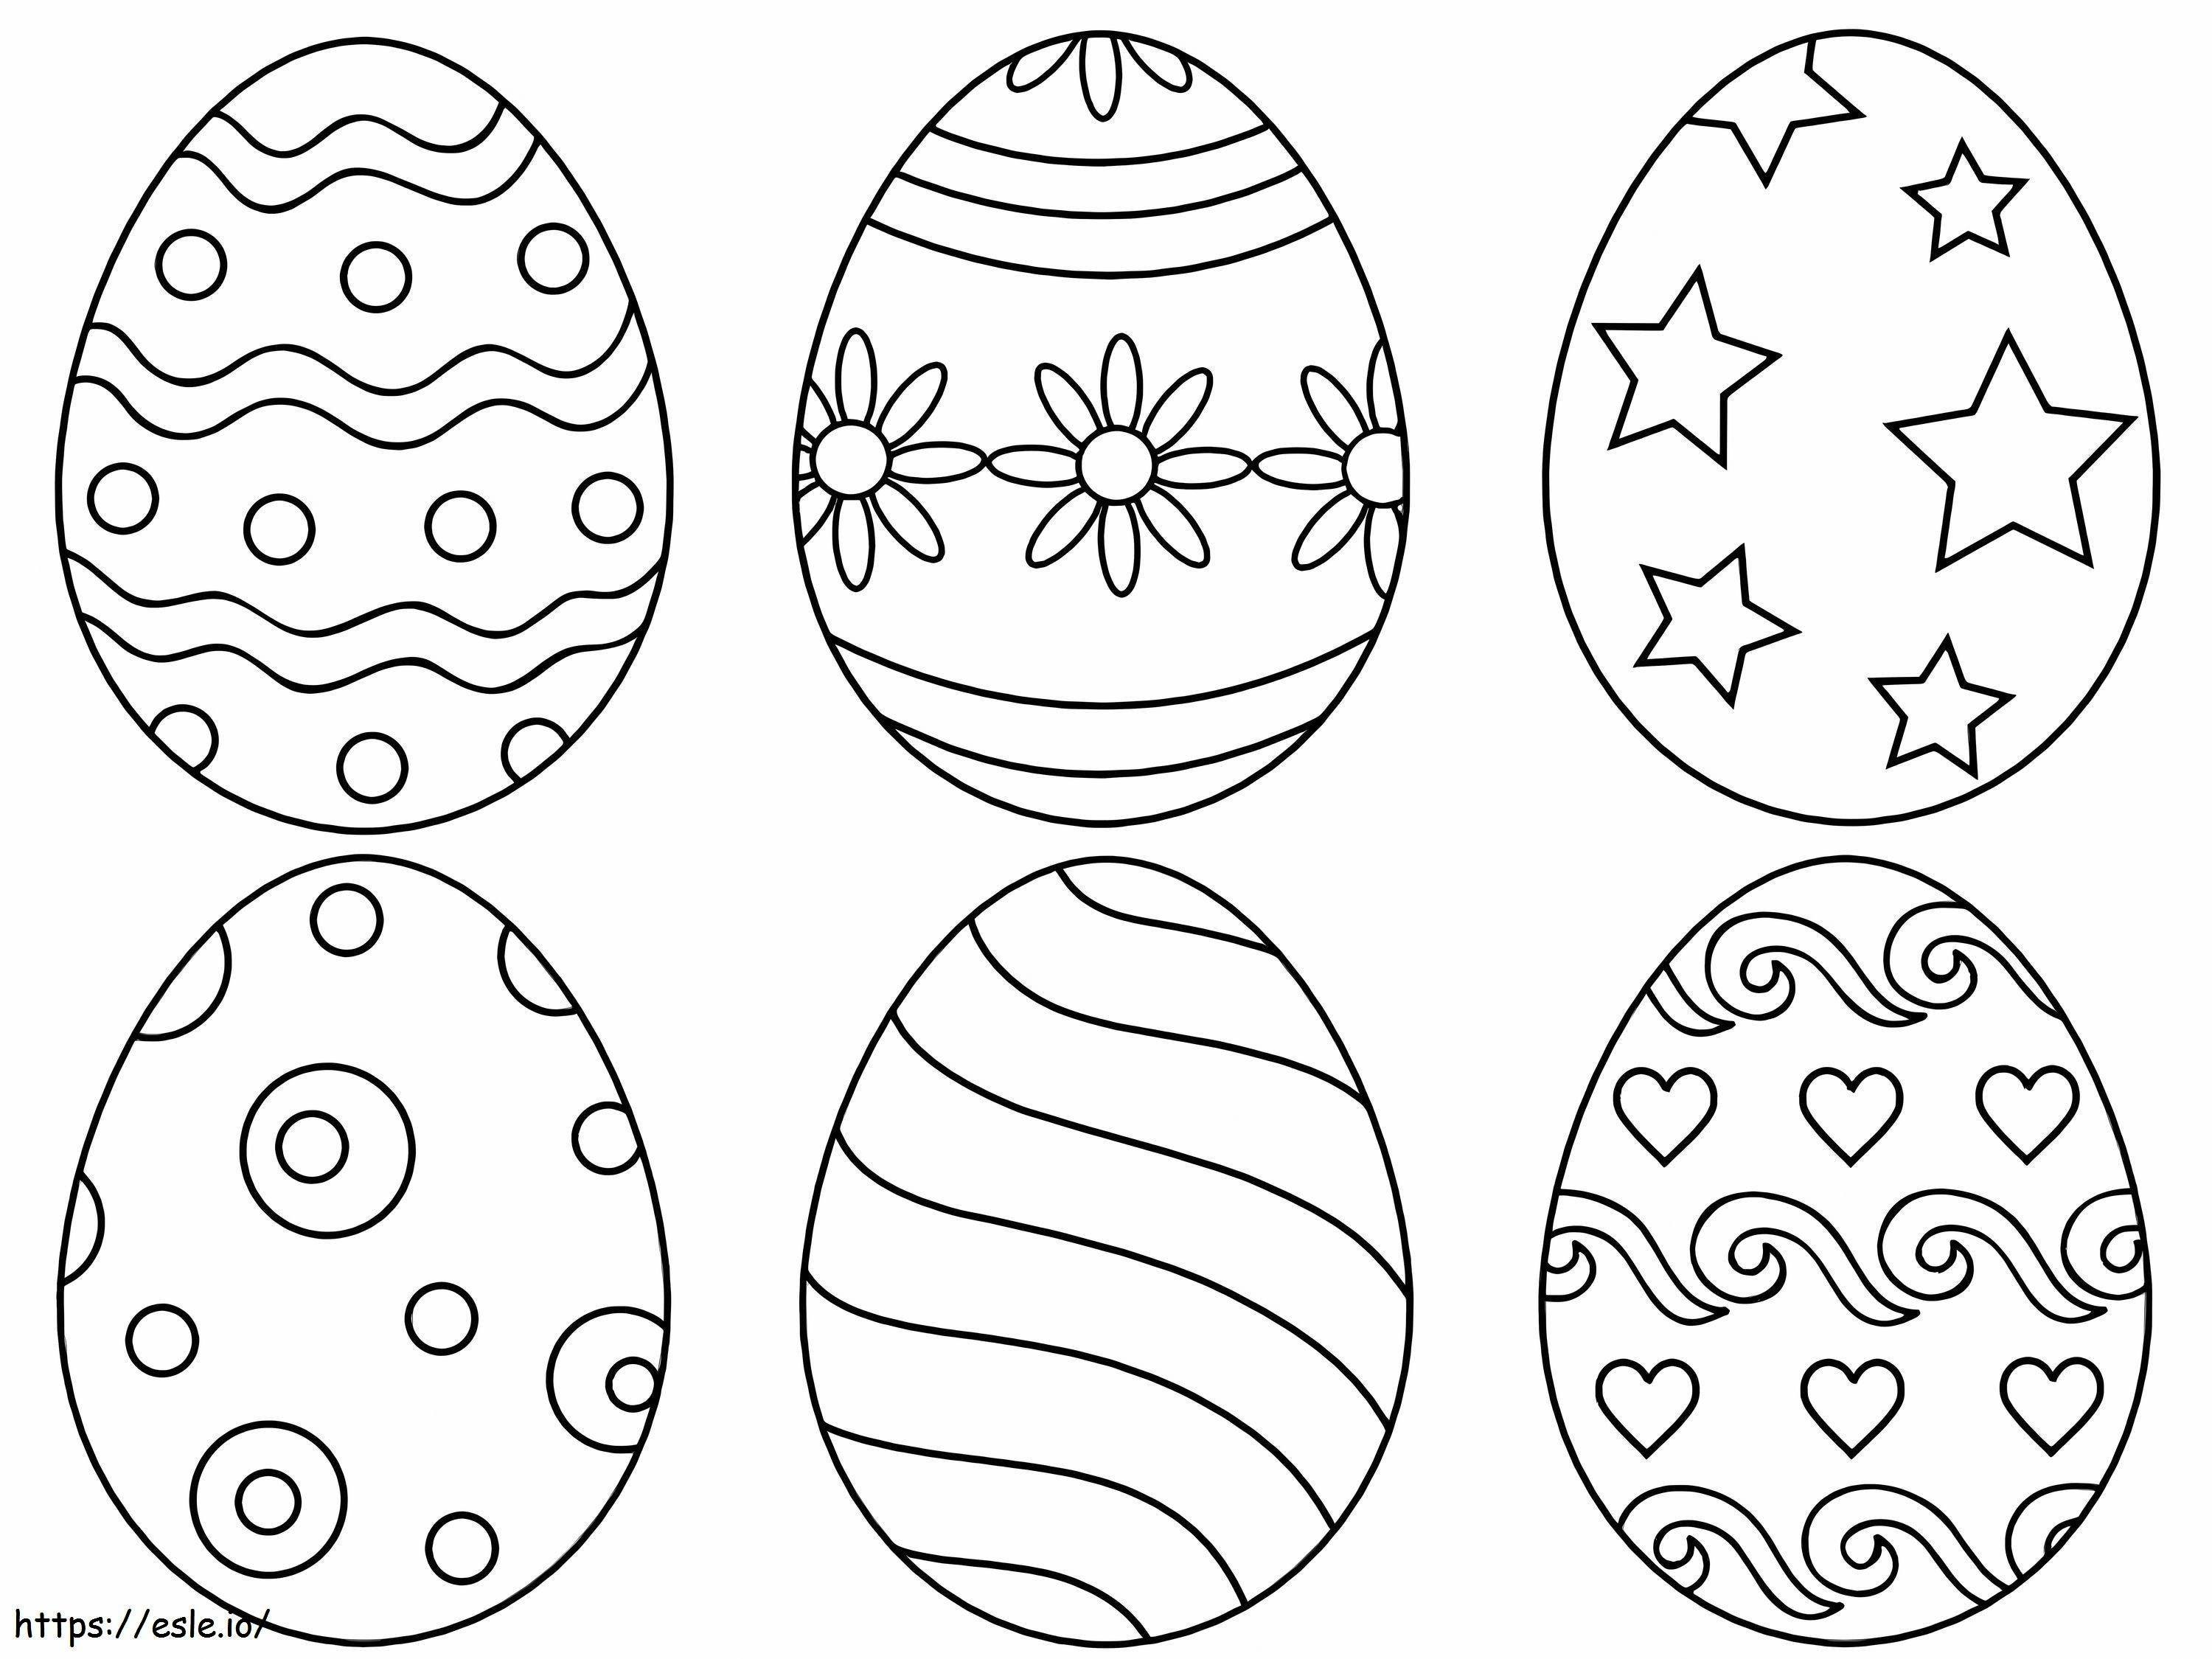 Six Easter Eggs coloring page